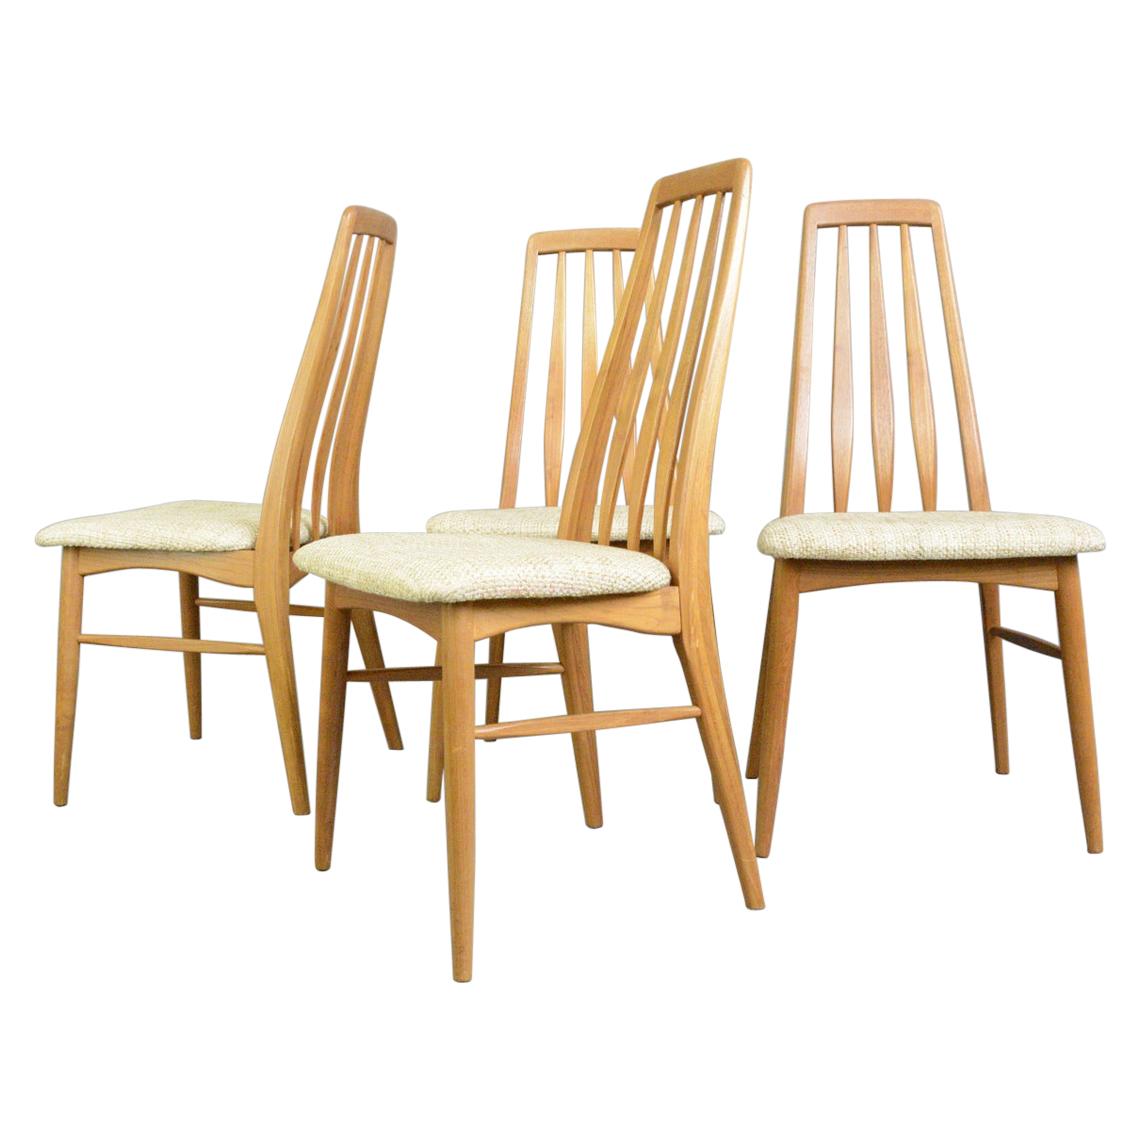 Set of 4 Eva Dining Chairs by Niels Koefoed for Koefoeds Hornslet, 1960s